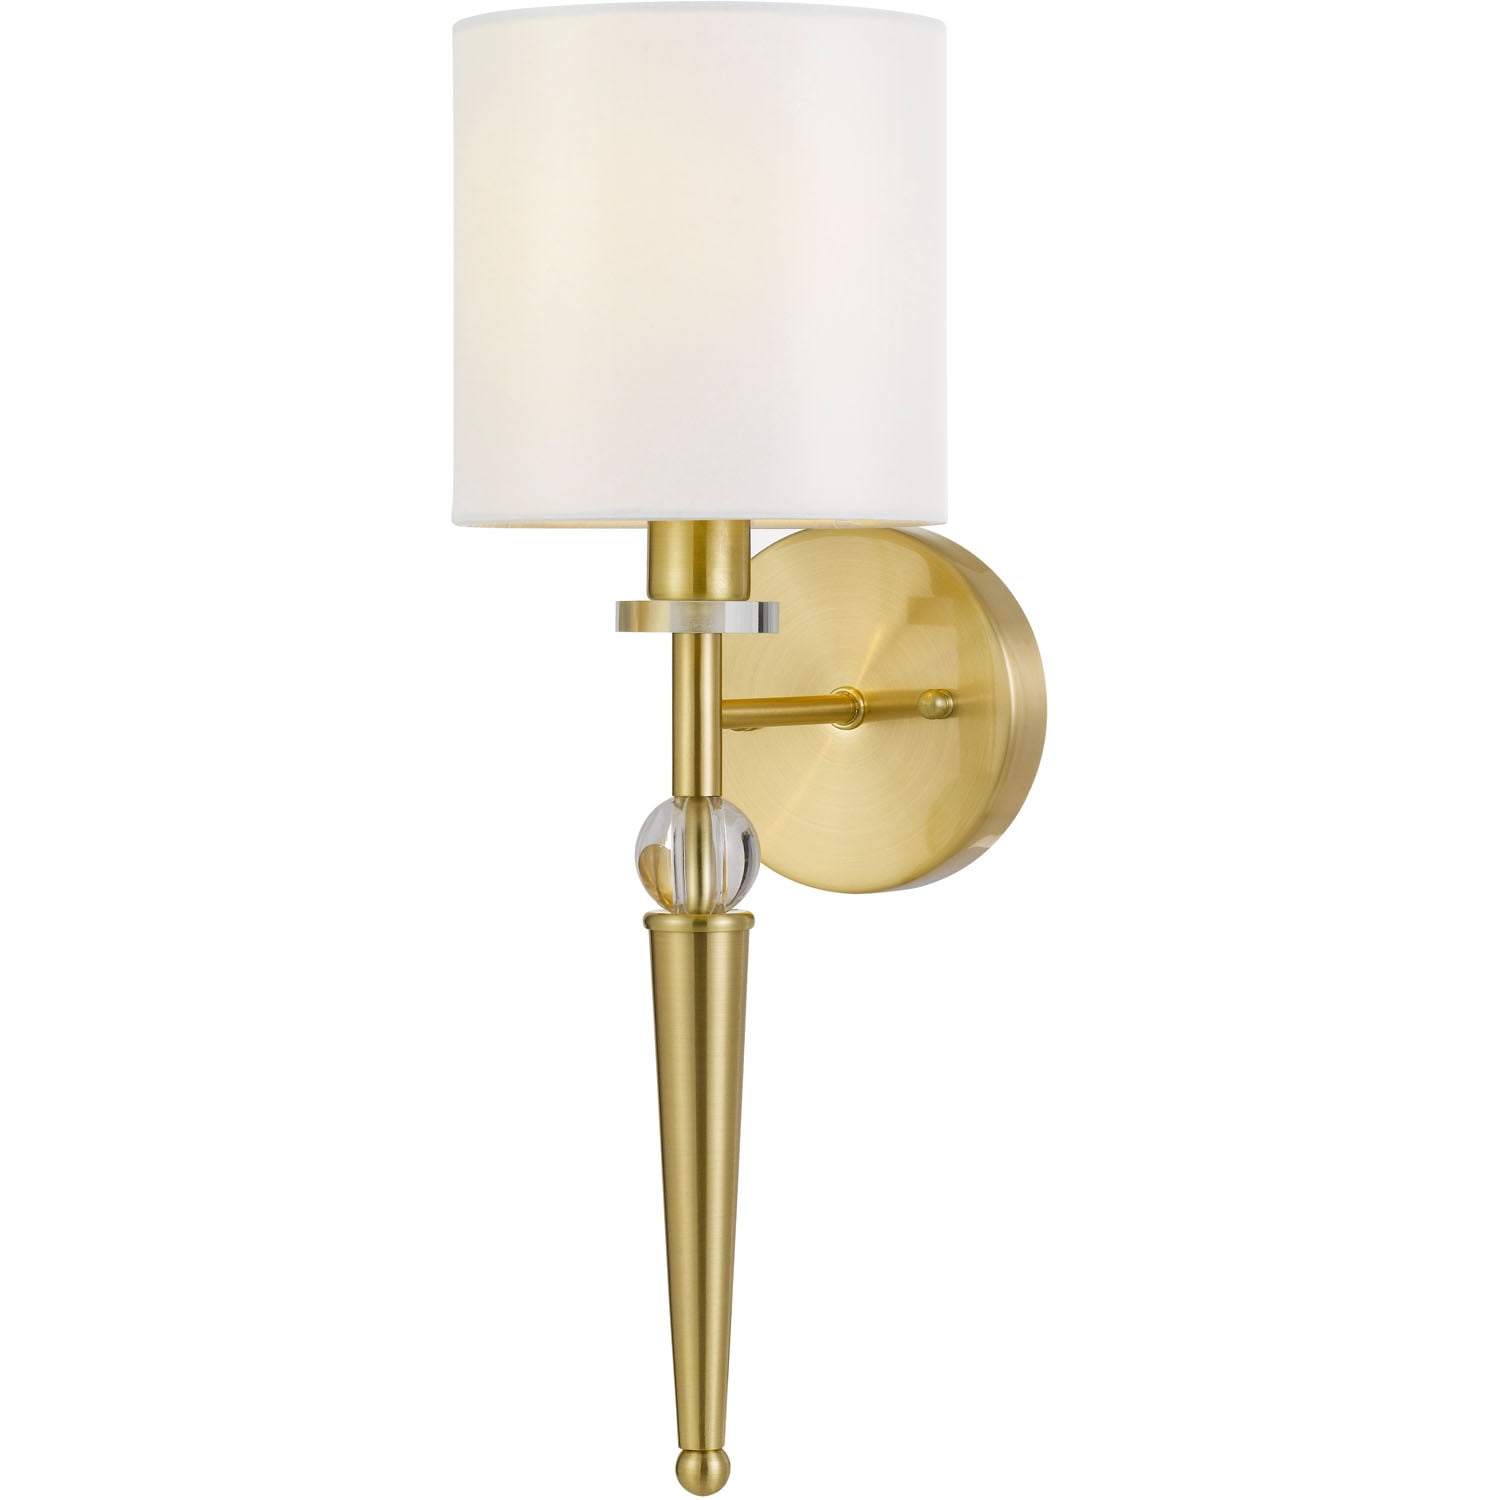 Picture of AF Lighting 9139-1W Merritt Wall Sconce, Gold